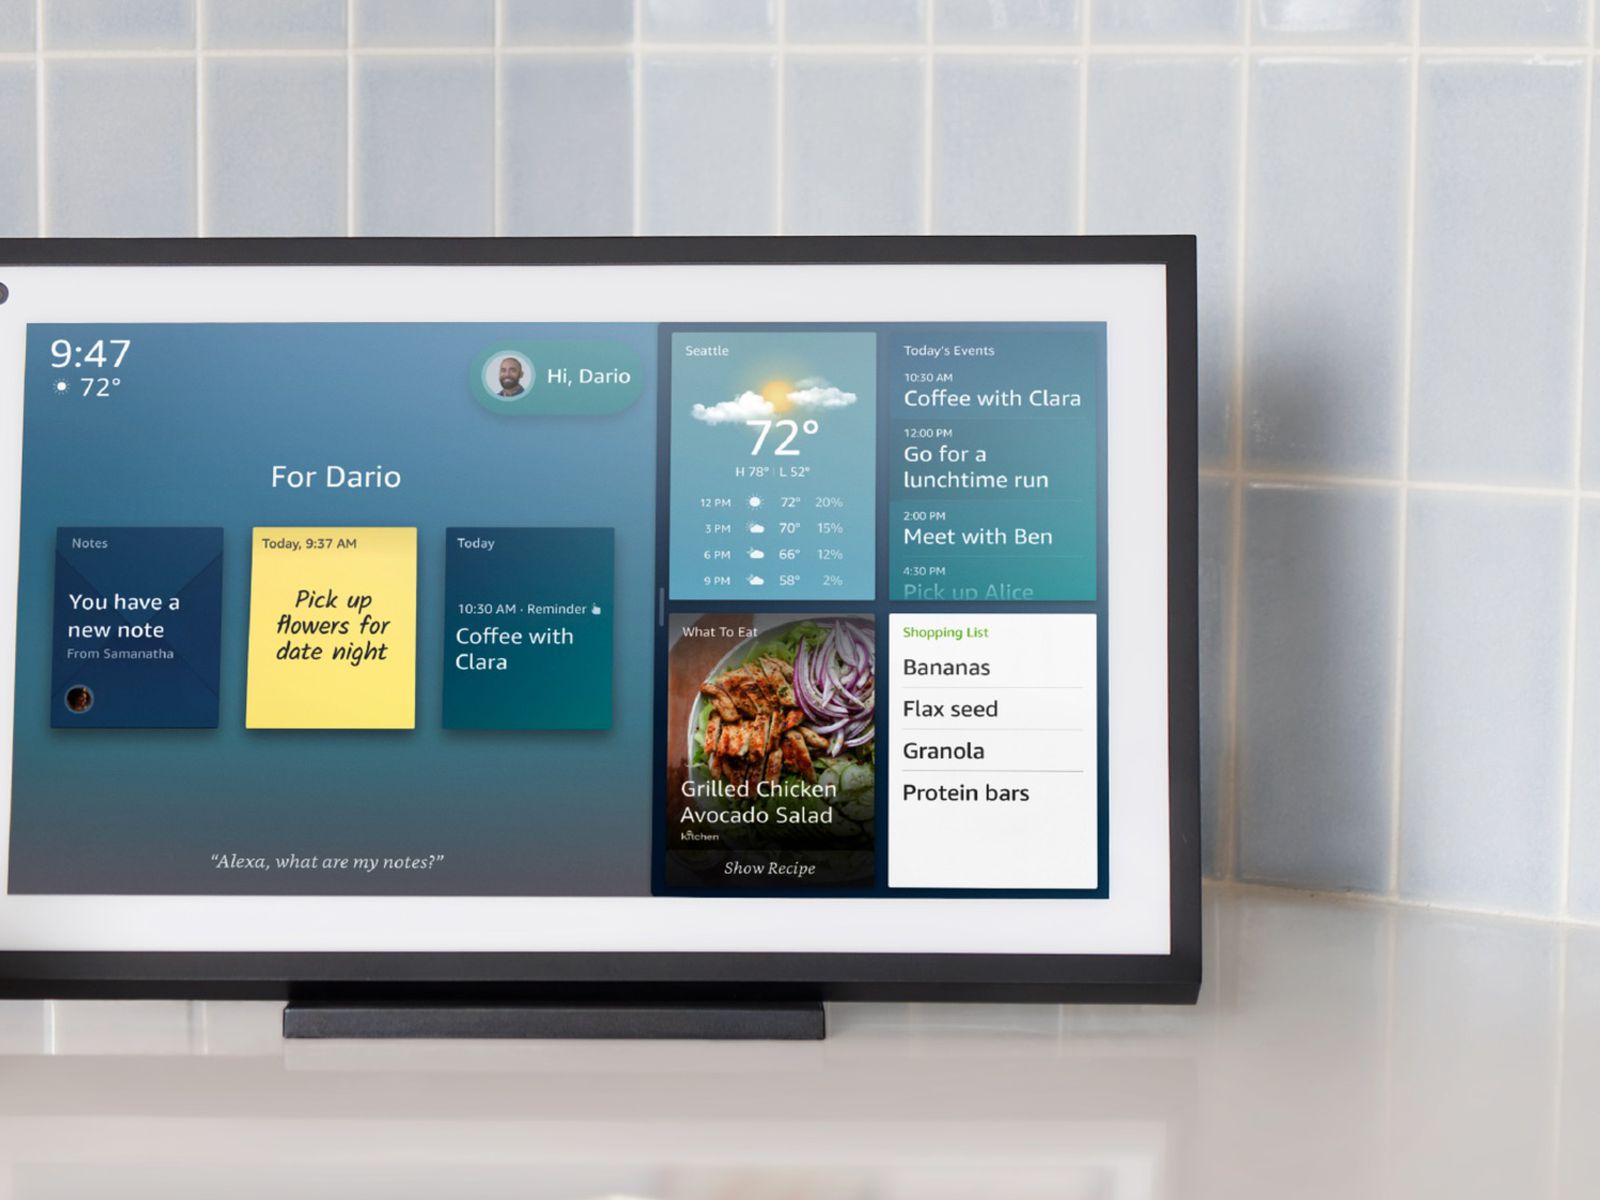 Amazon Introduces Matter Casting To Enhance Smart Displays And TVs